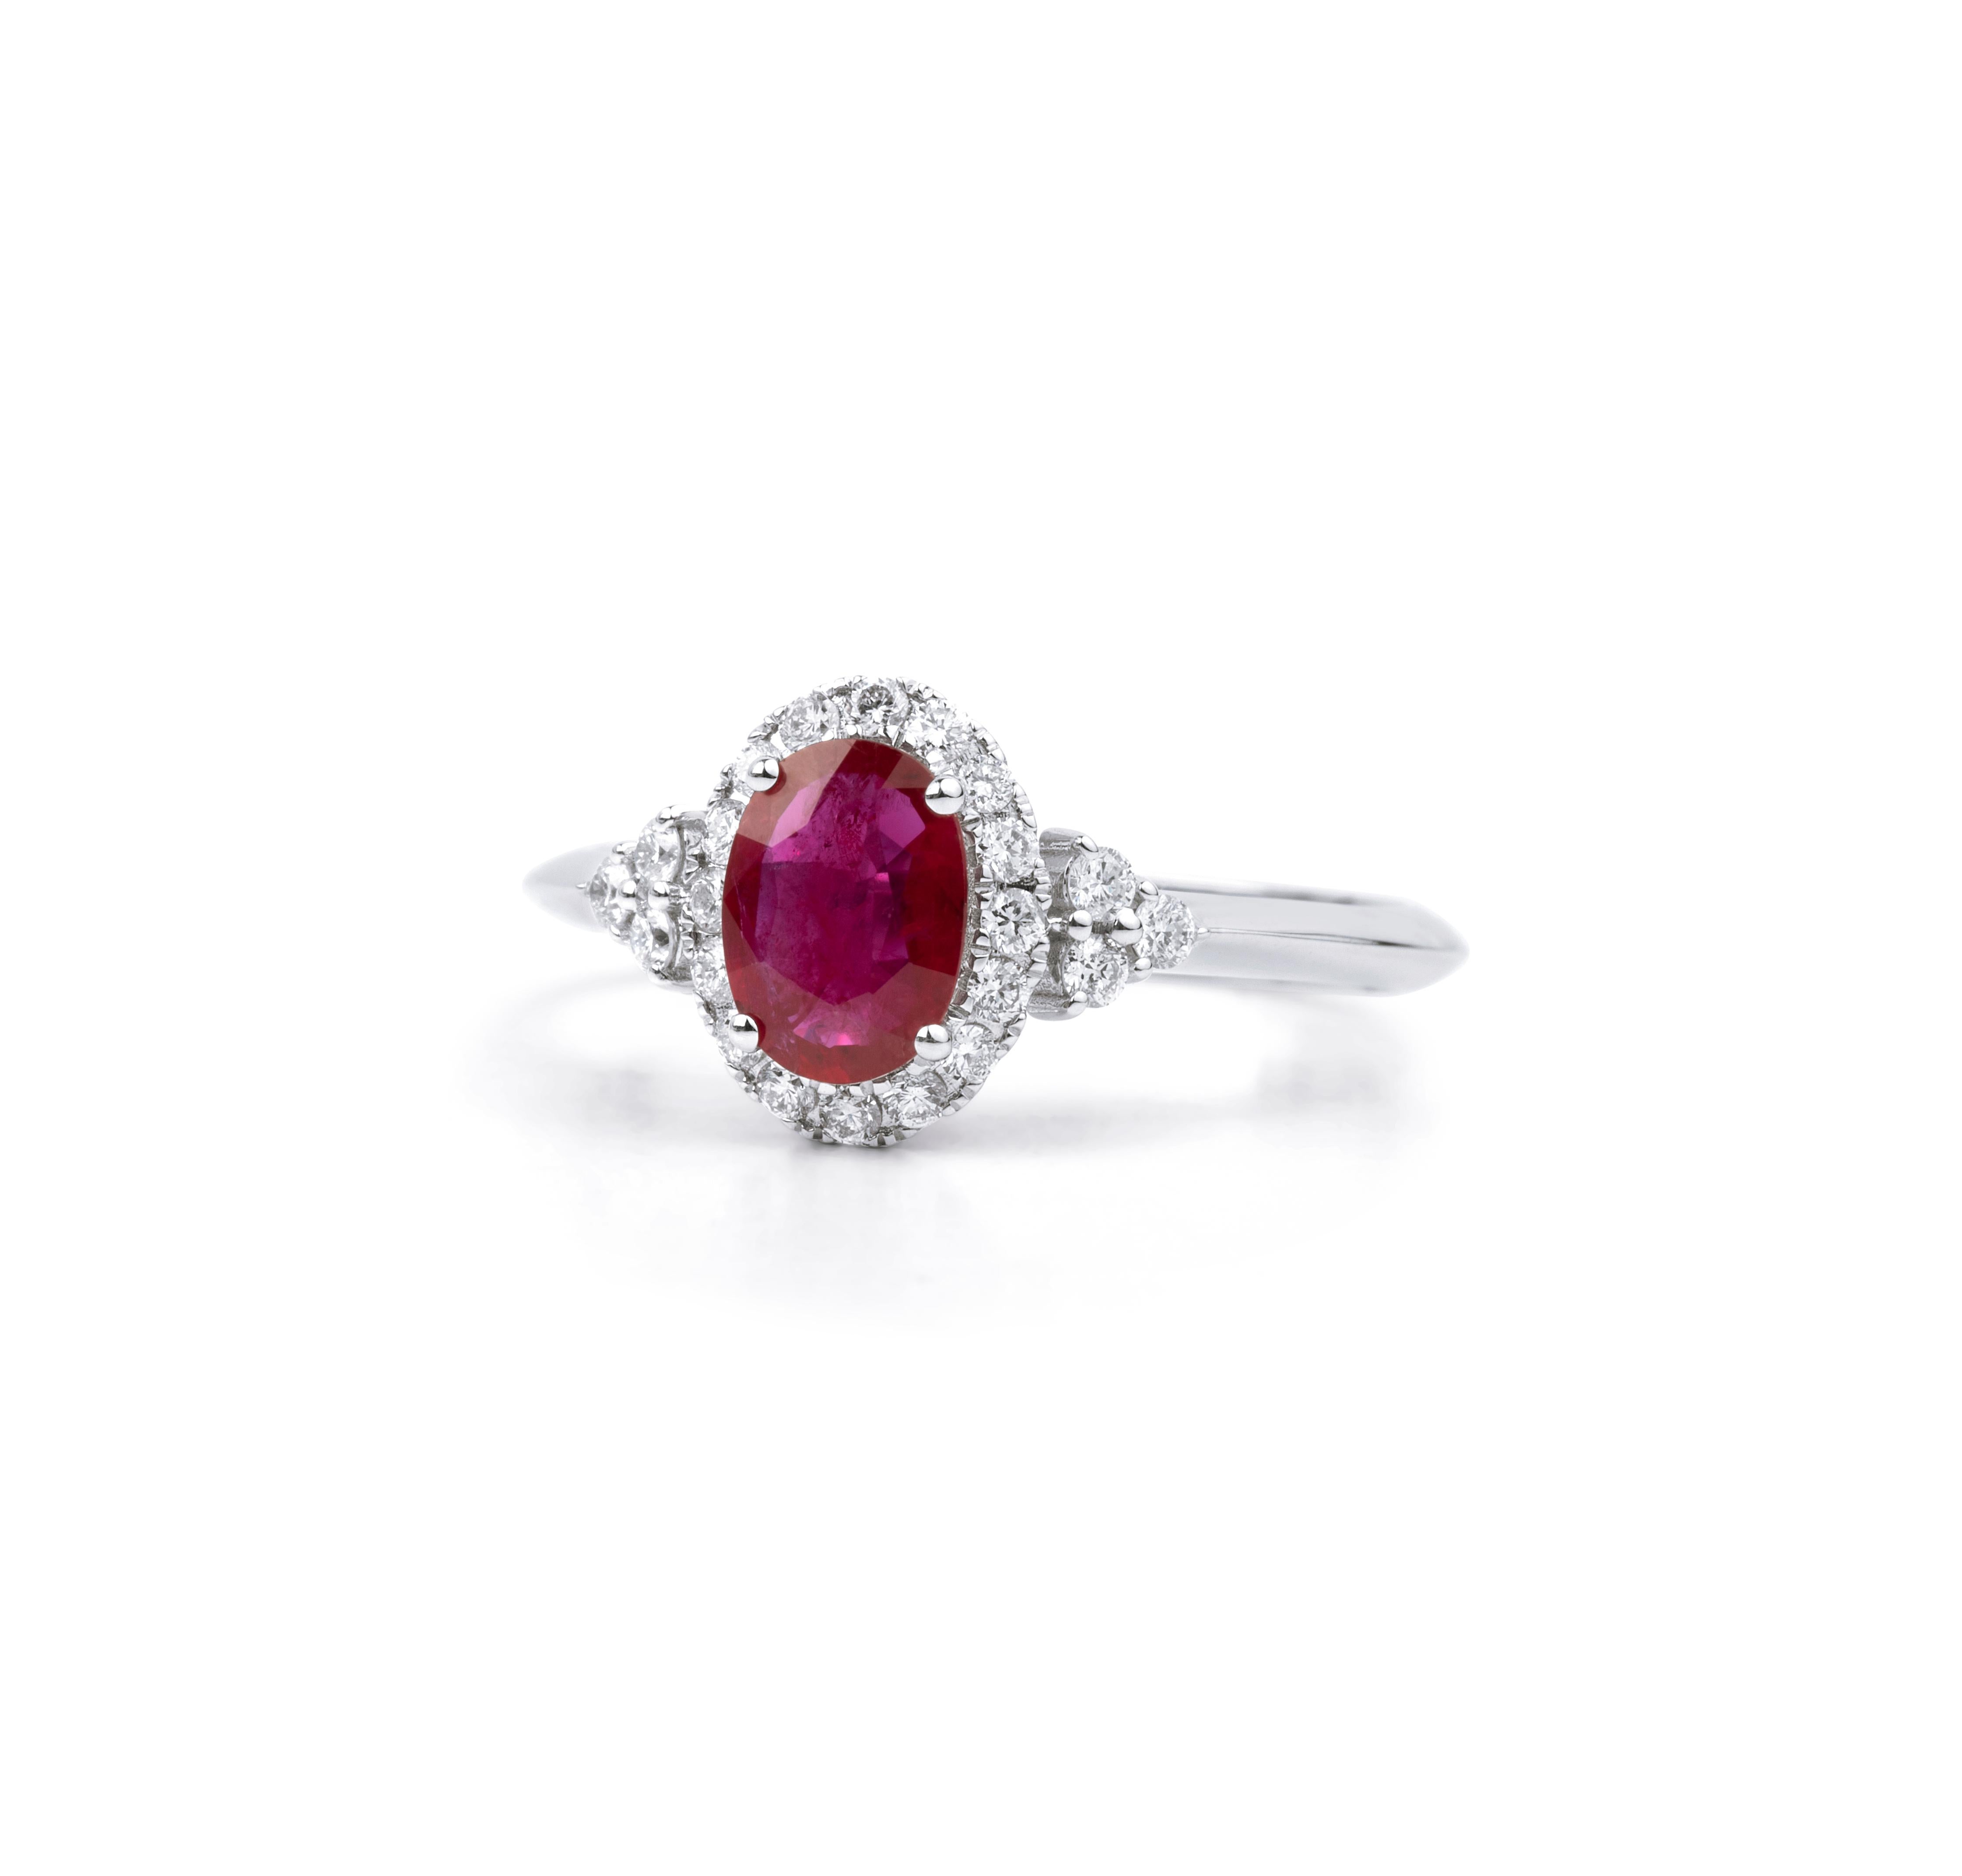 Oval Ruby Diamond Tapper Baguette Round Cut Double Halo Engagement Ring

Available in 18k white gold.

Same design can be made also with other custom gemstones per request.

Product details:

- Solid gold

- Diamond - approx. 0.24 carat

- Ruby -